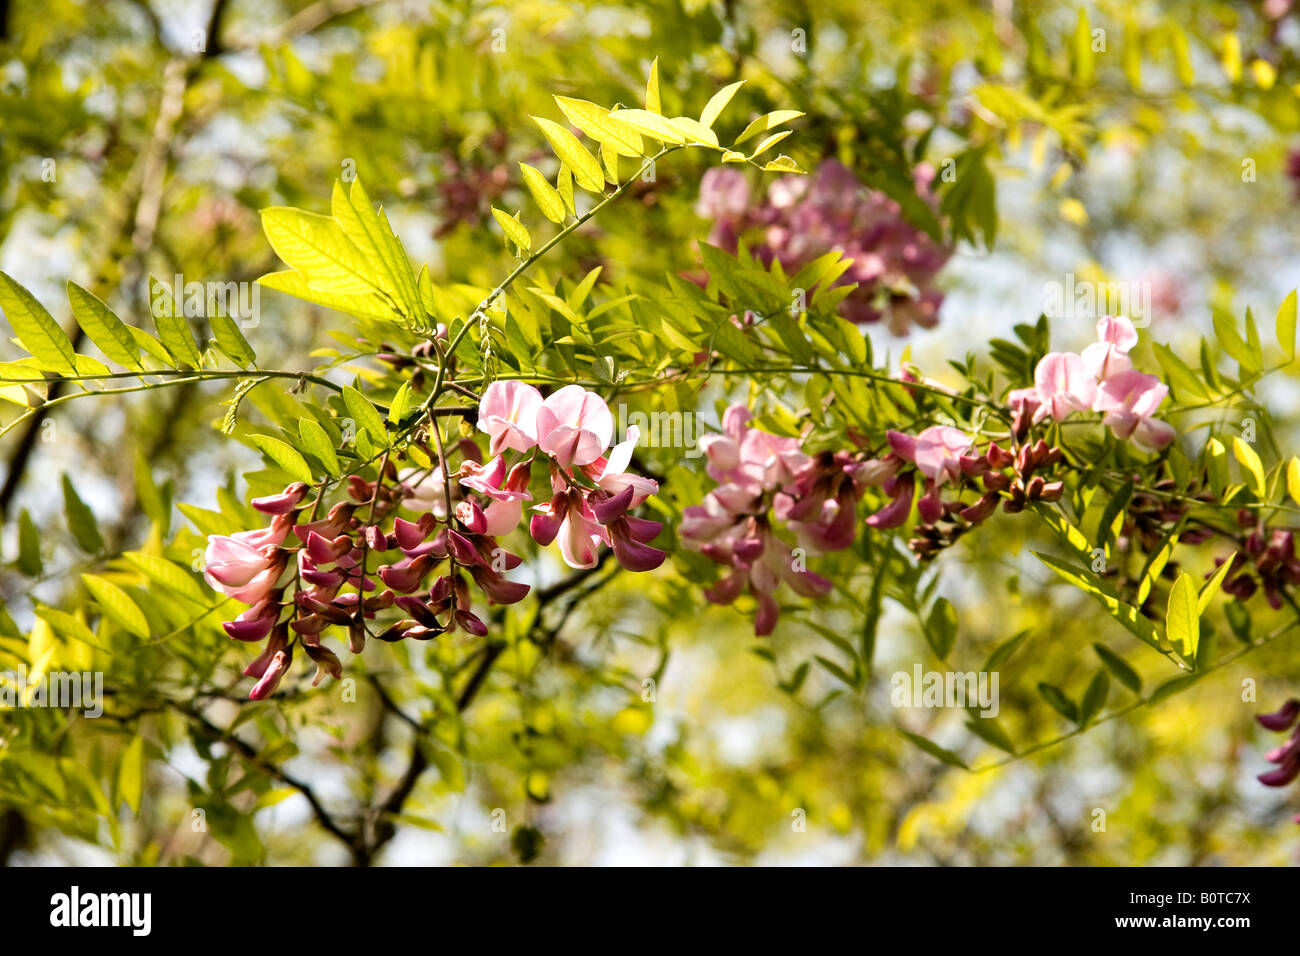 Pink flowers and new spring leaves of false acacia tree Robinia pseudoacacia Decaisneana against a blue sky in the sun Stock Photo